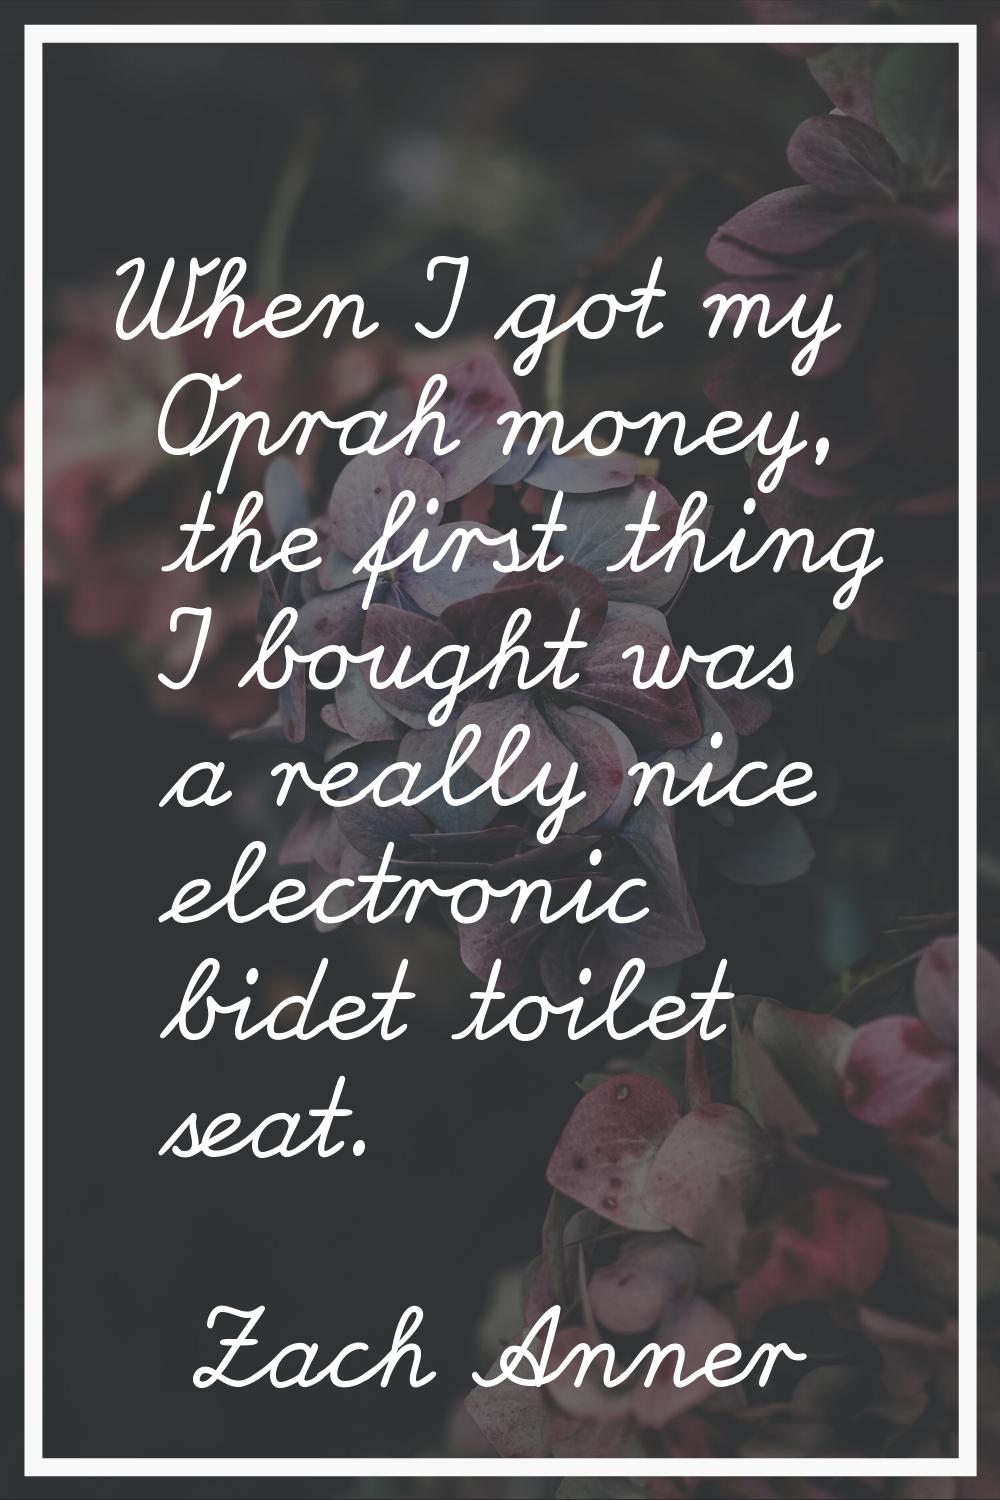 When I got my Oprah money, the first thing I bought was a really nice electronic bidet toilet seat.